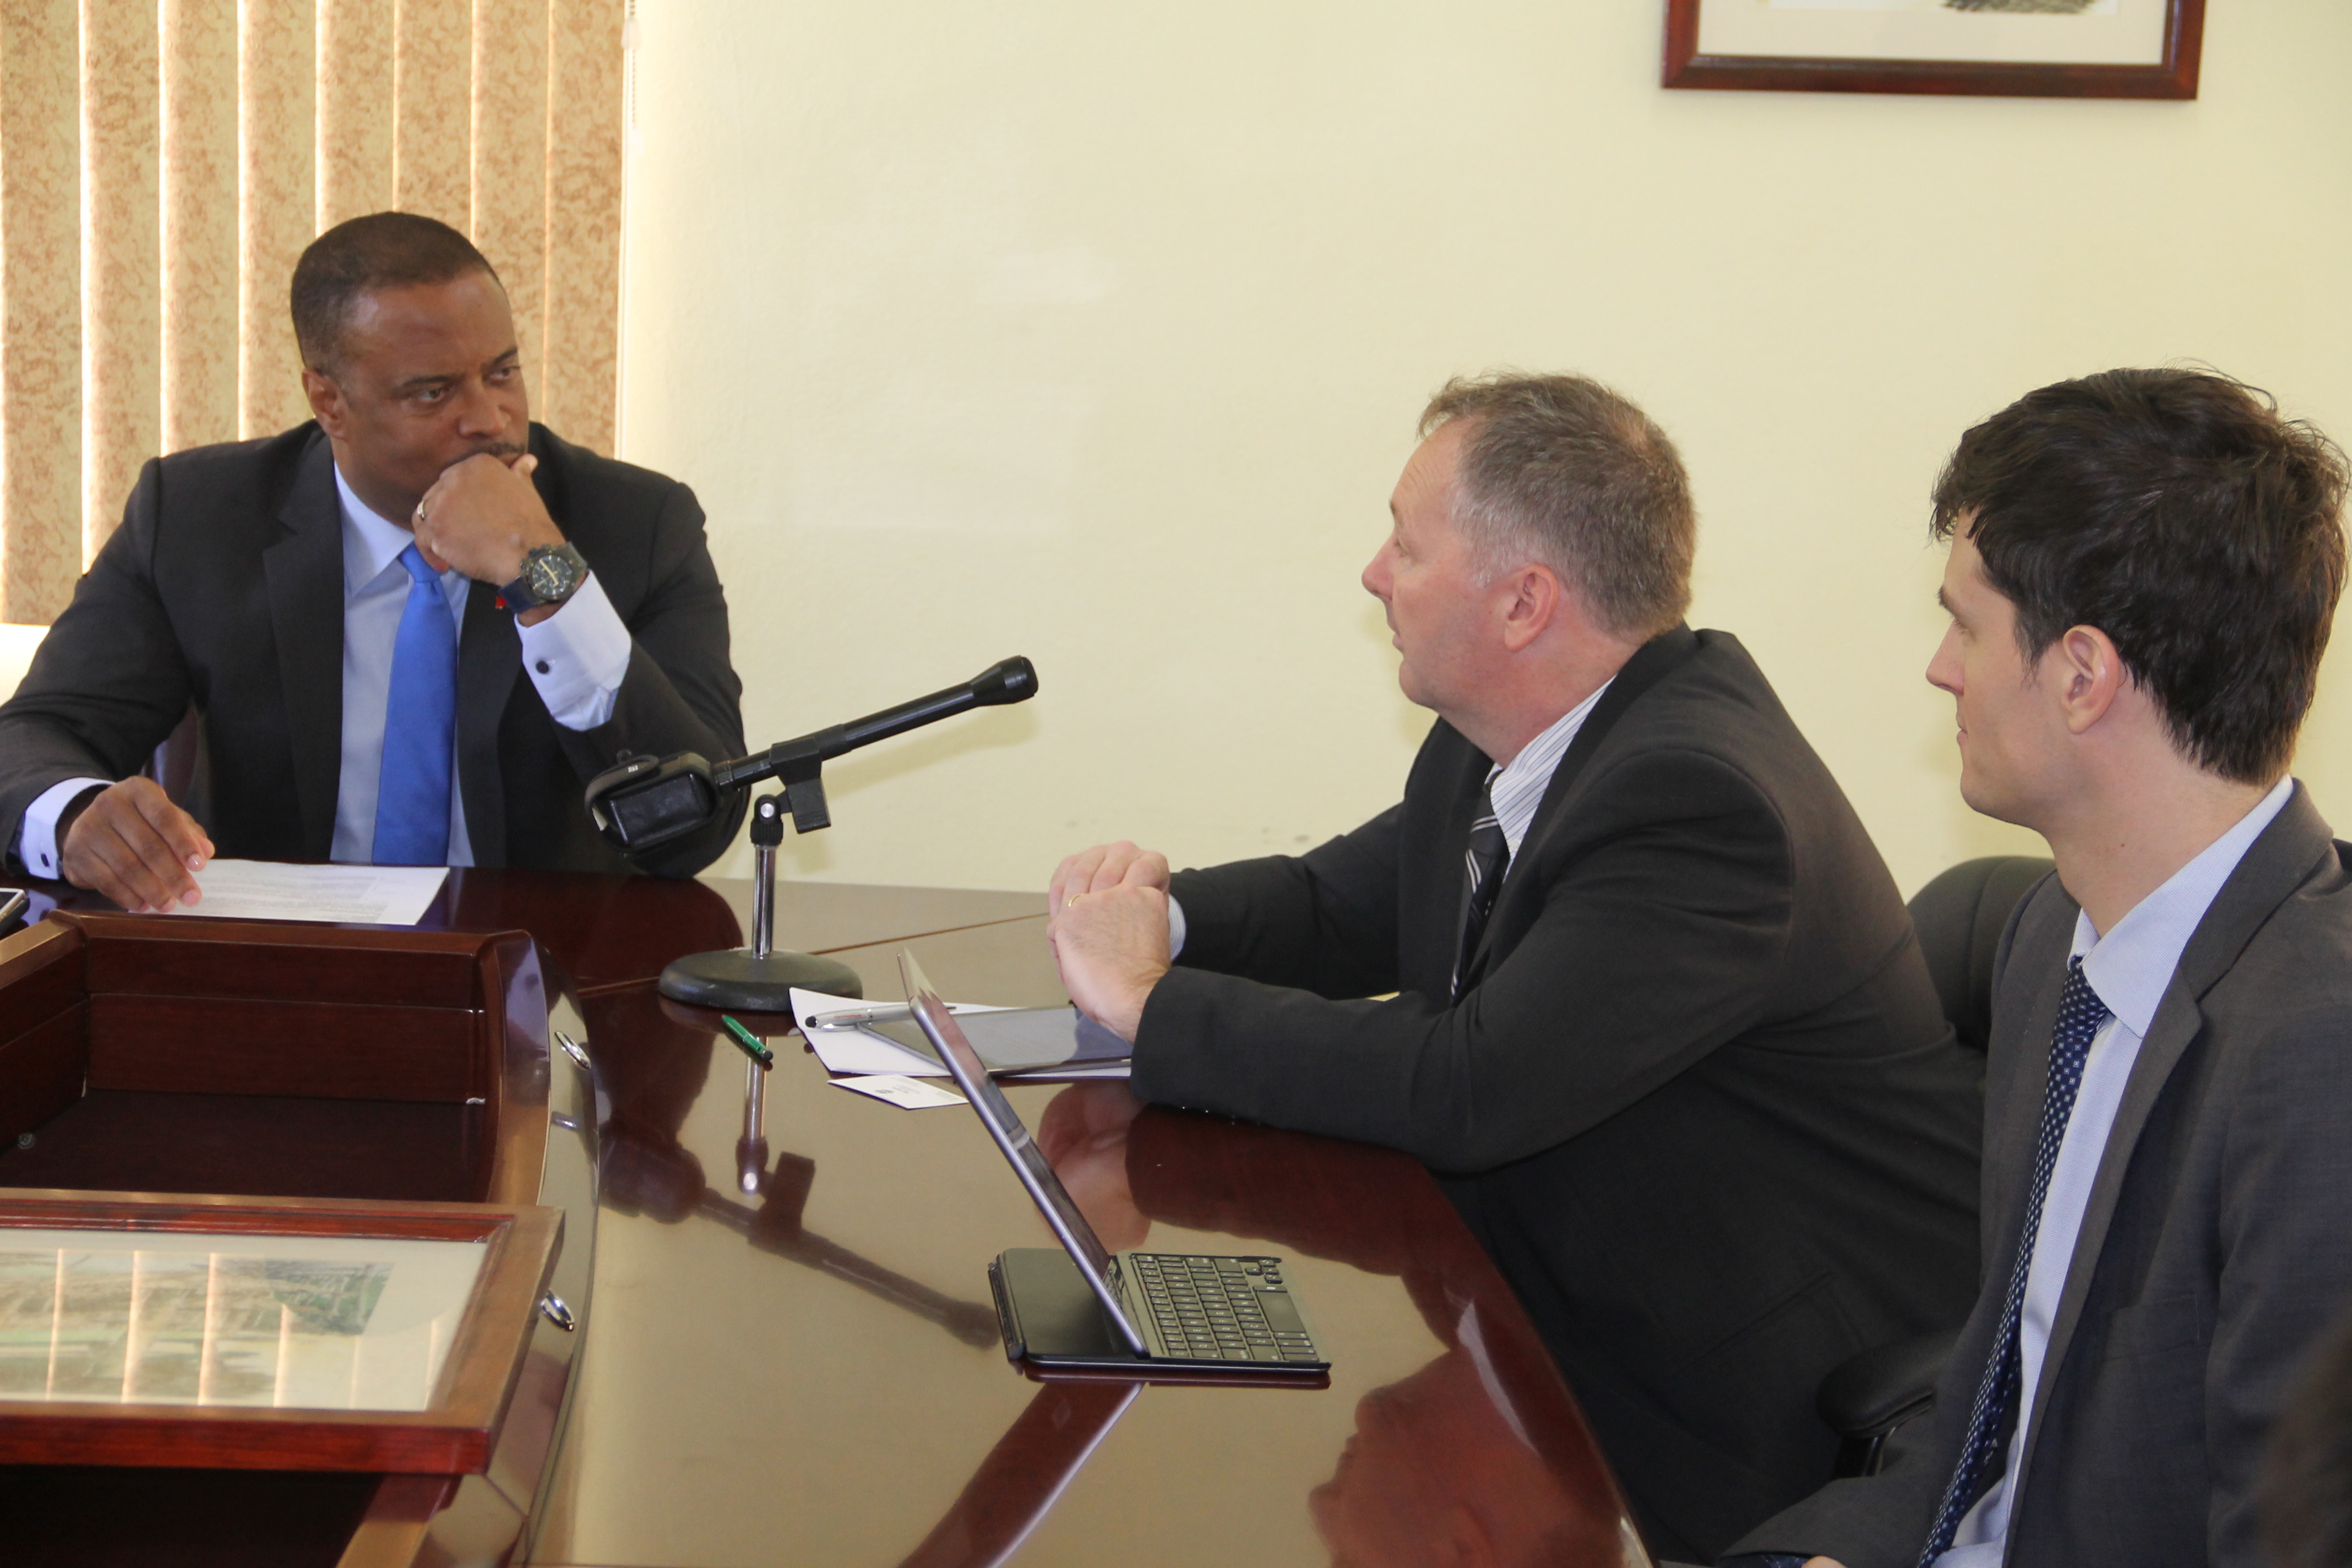 Premier of Nevis Hon. Mark Brantley, in discussion with IMF Consultant Mr. Matt Davies; and Nicholas End, Economist at the Department of Public Finances on February 02, 2018 at the NIA conference room at the Social Security Building